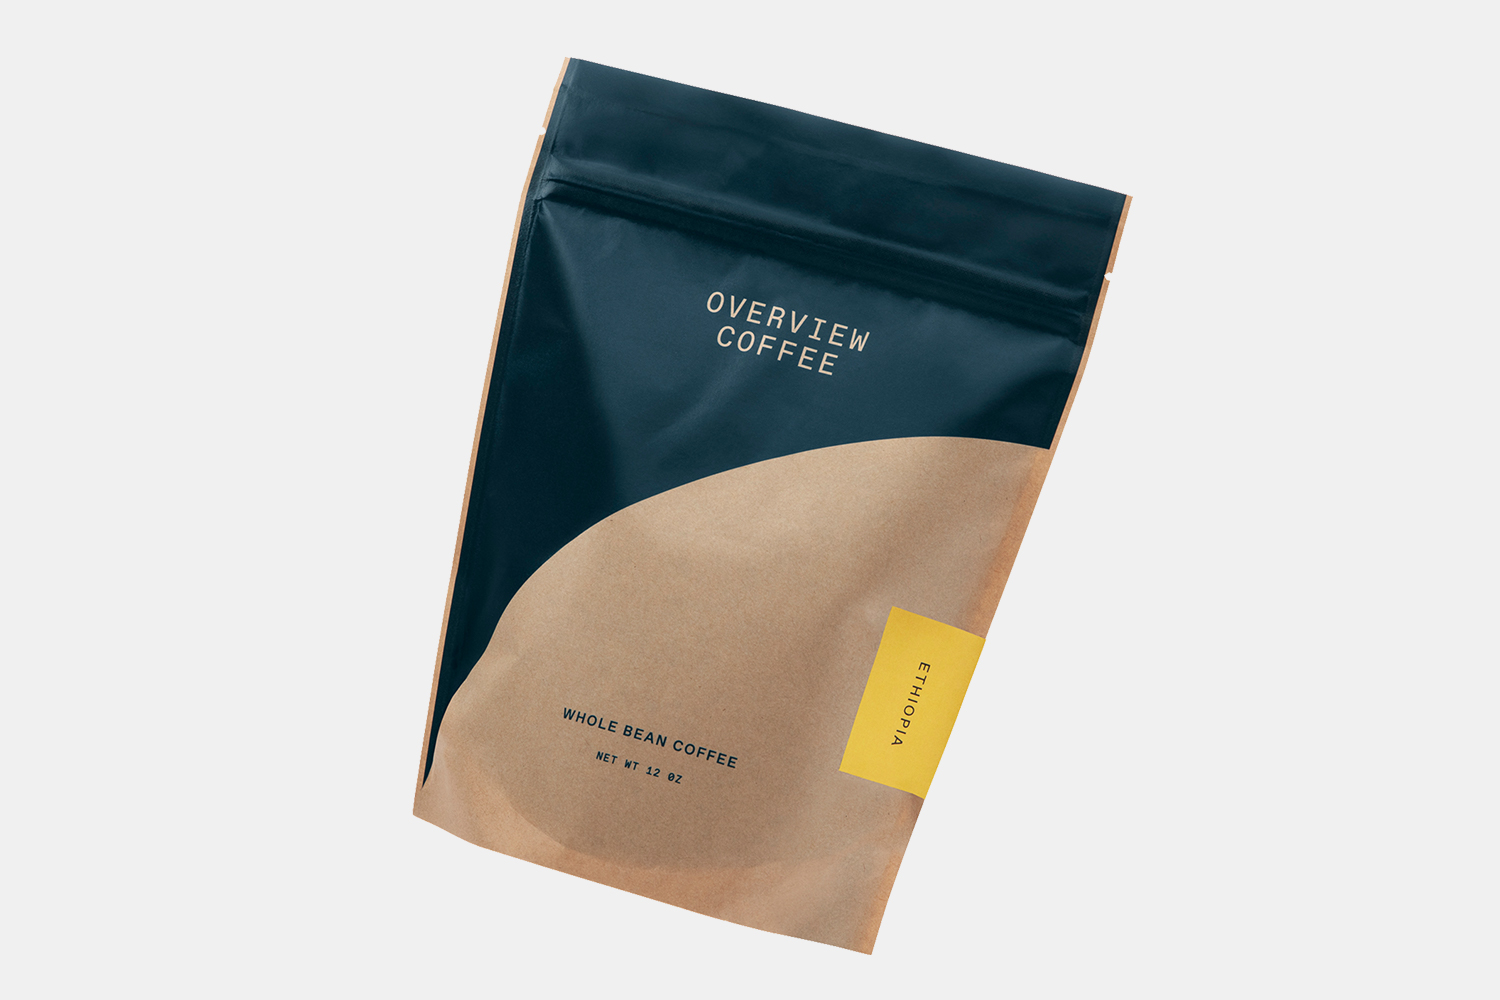 Overview Coffee Subscription